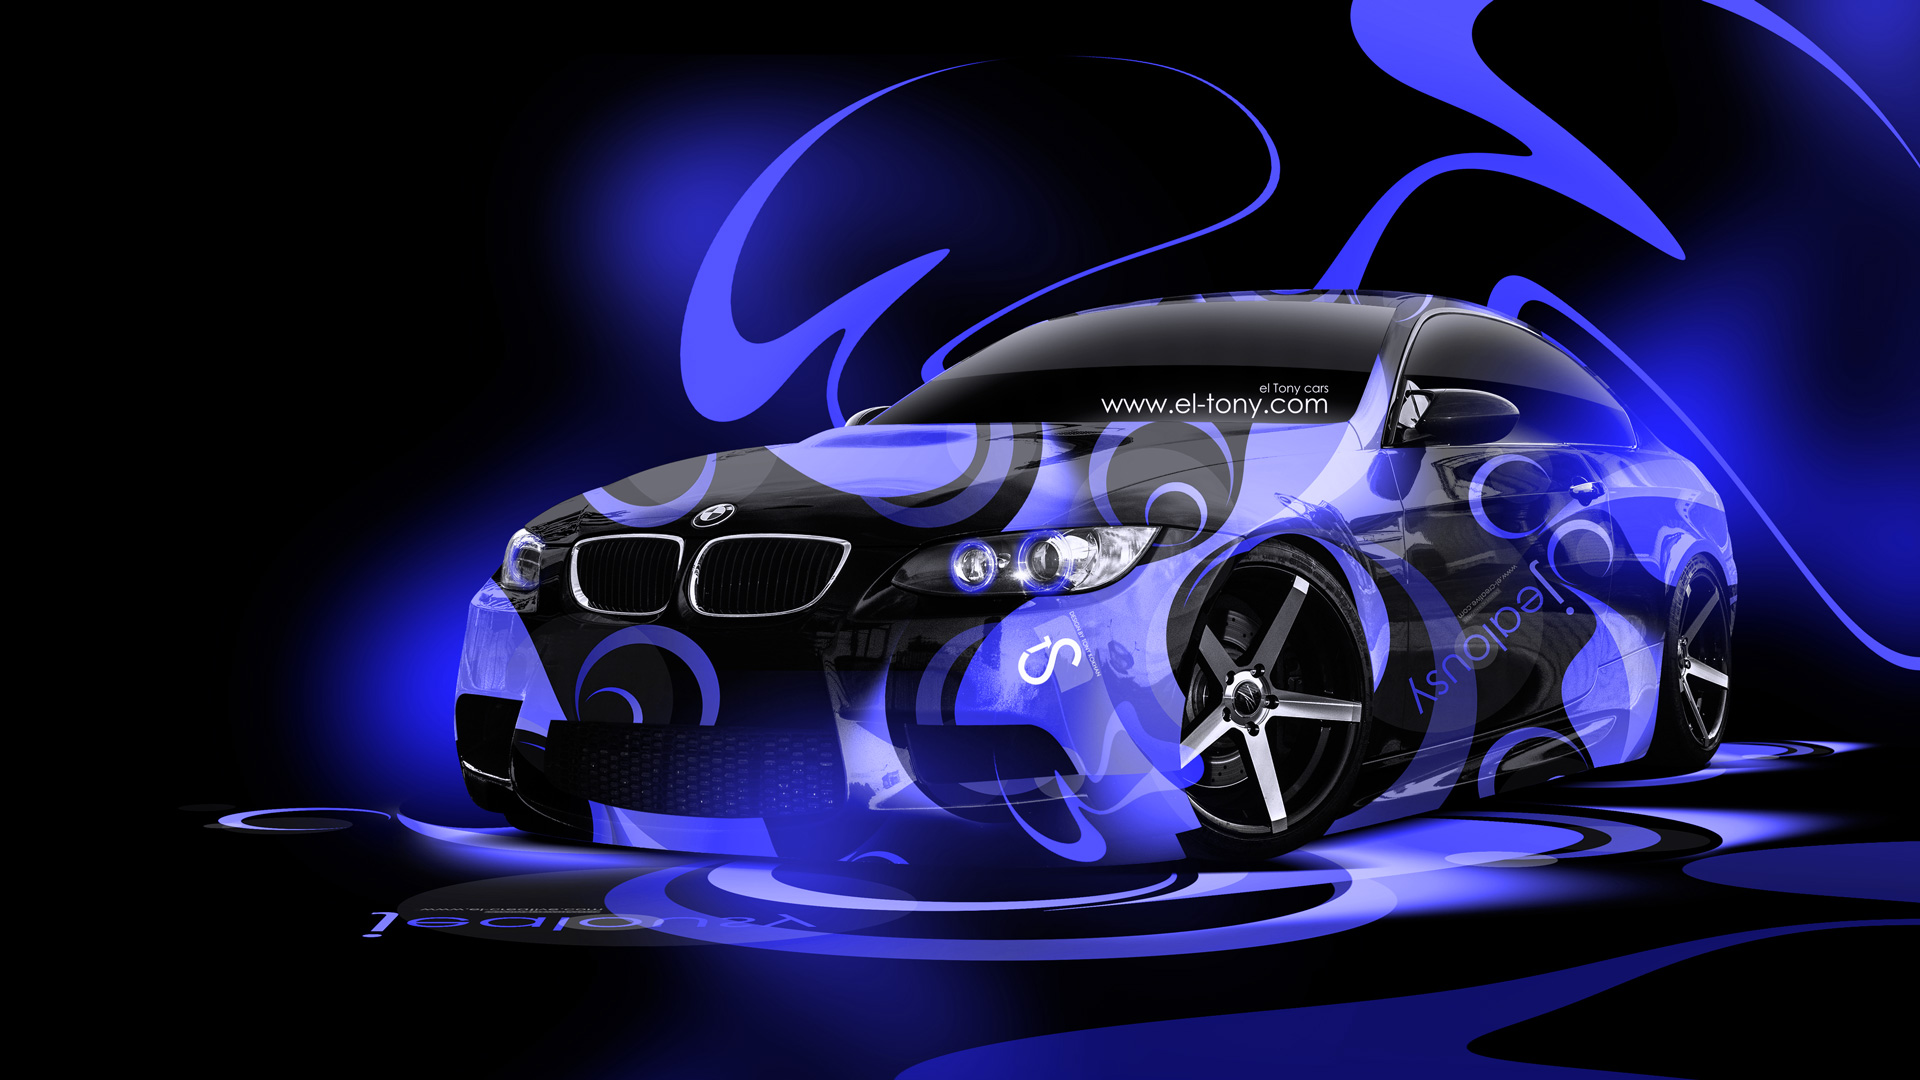 BMW E92 M3 Super Abstract Car 2014 Blue Neon HD Wallpapers design by